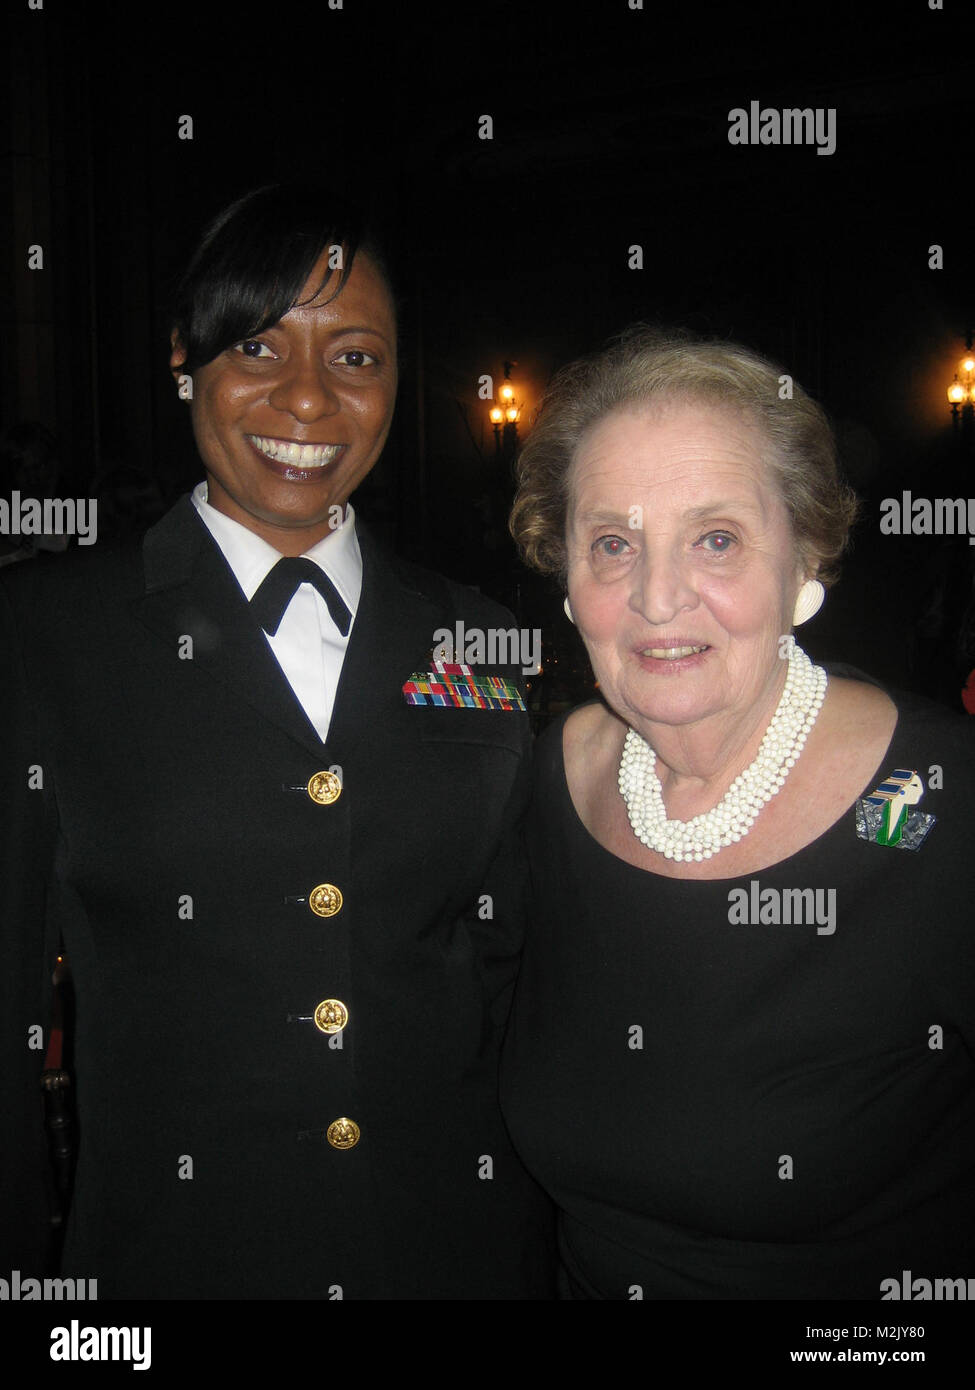 LCDR Wooten and Madeline Albright - Tiffany Circle Society by NavyMedicine Stock Photo